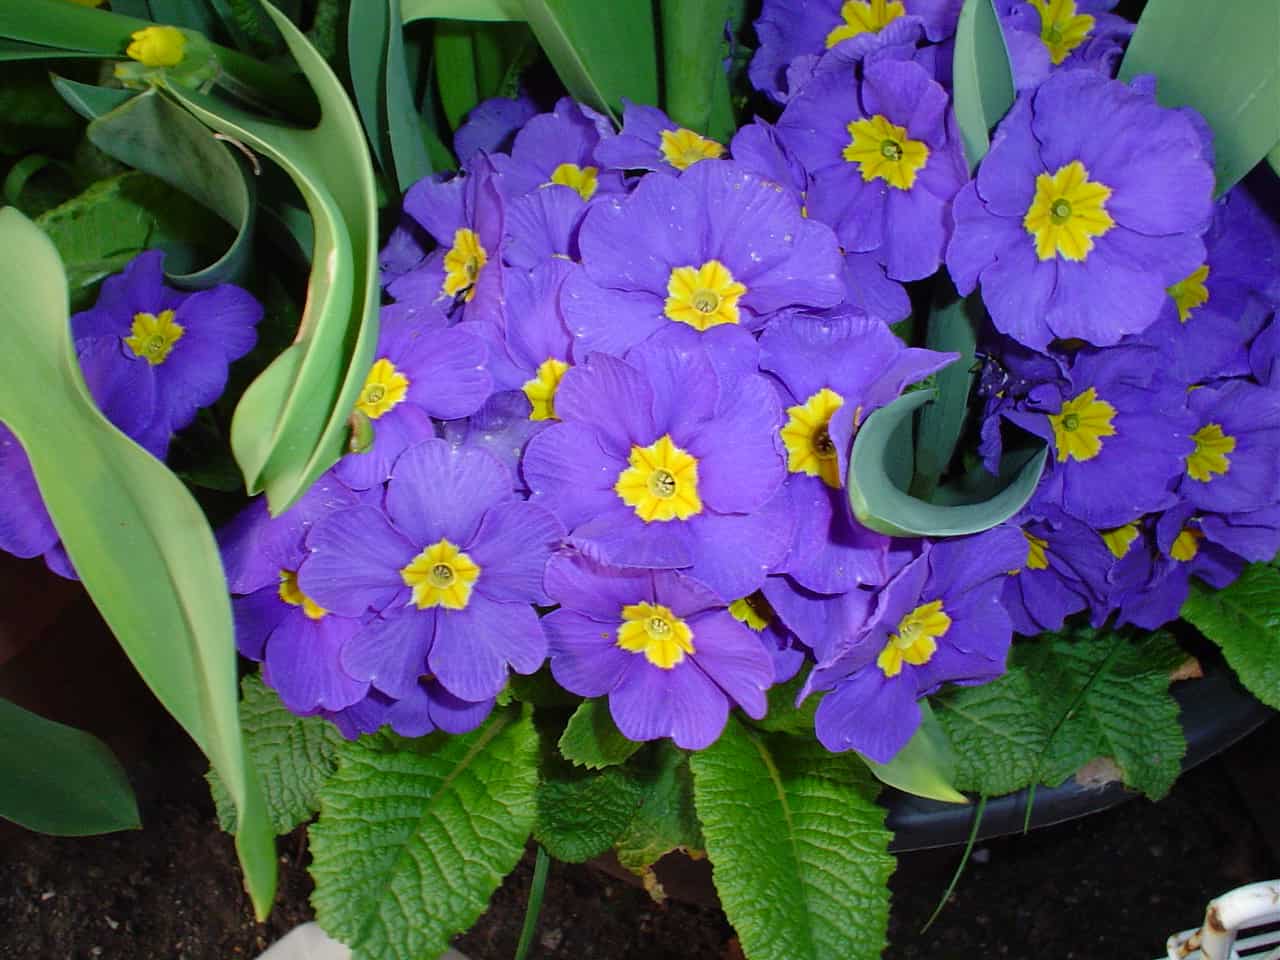 Garden centres are full of seasonal favourites like primroses (pictured) says our gardening columnist Jackie Power